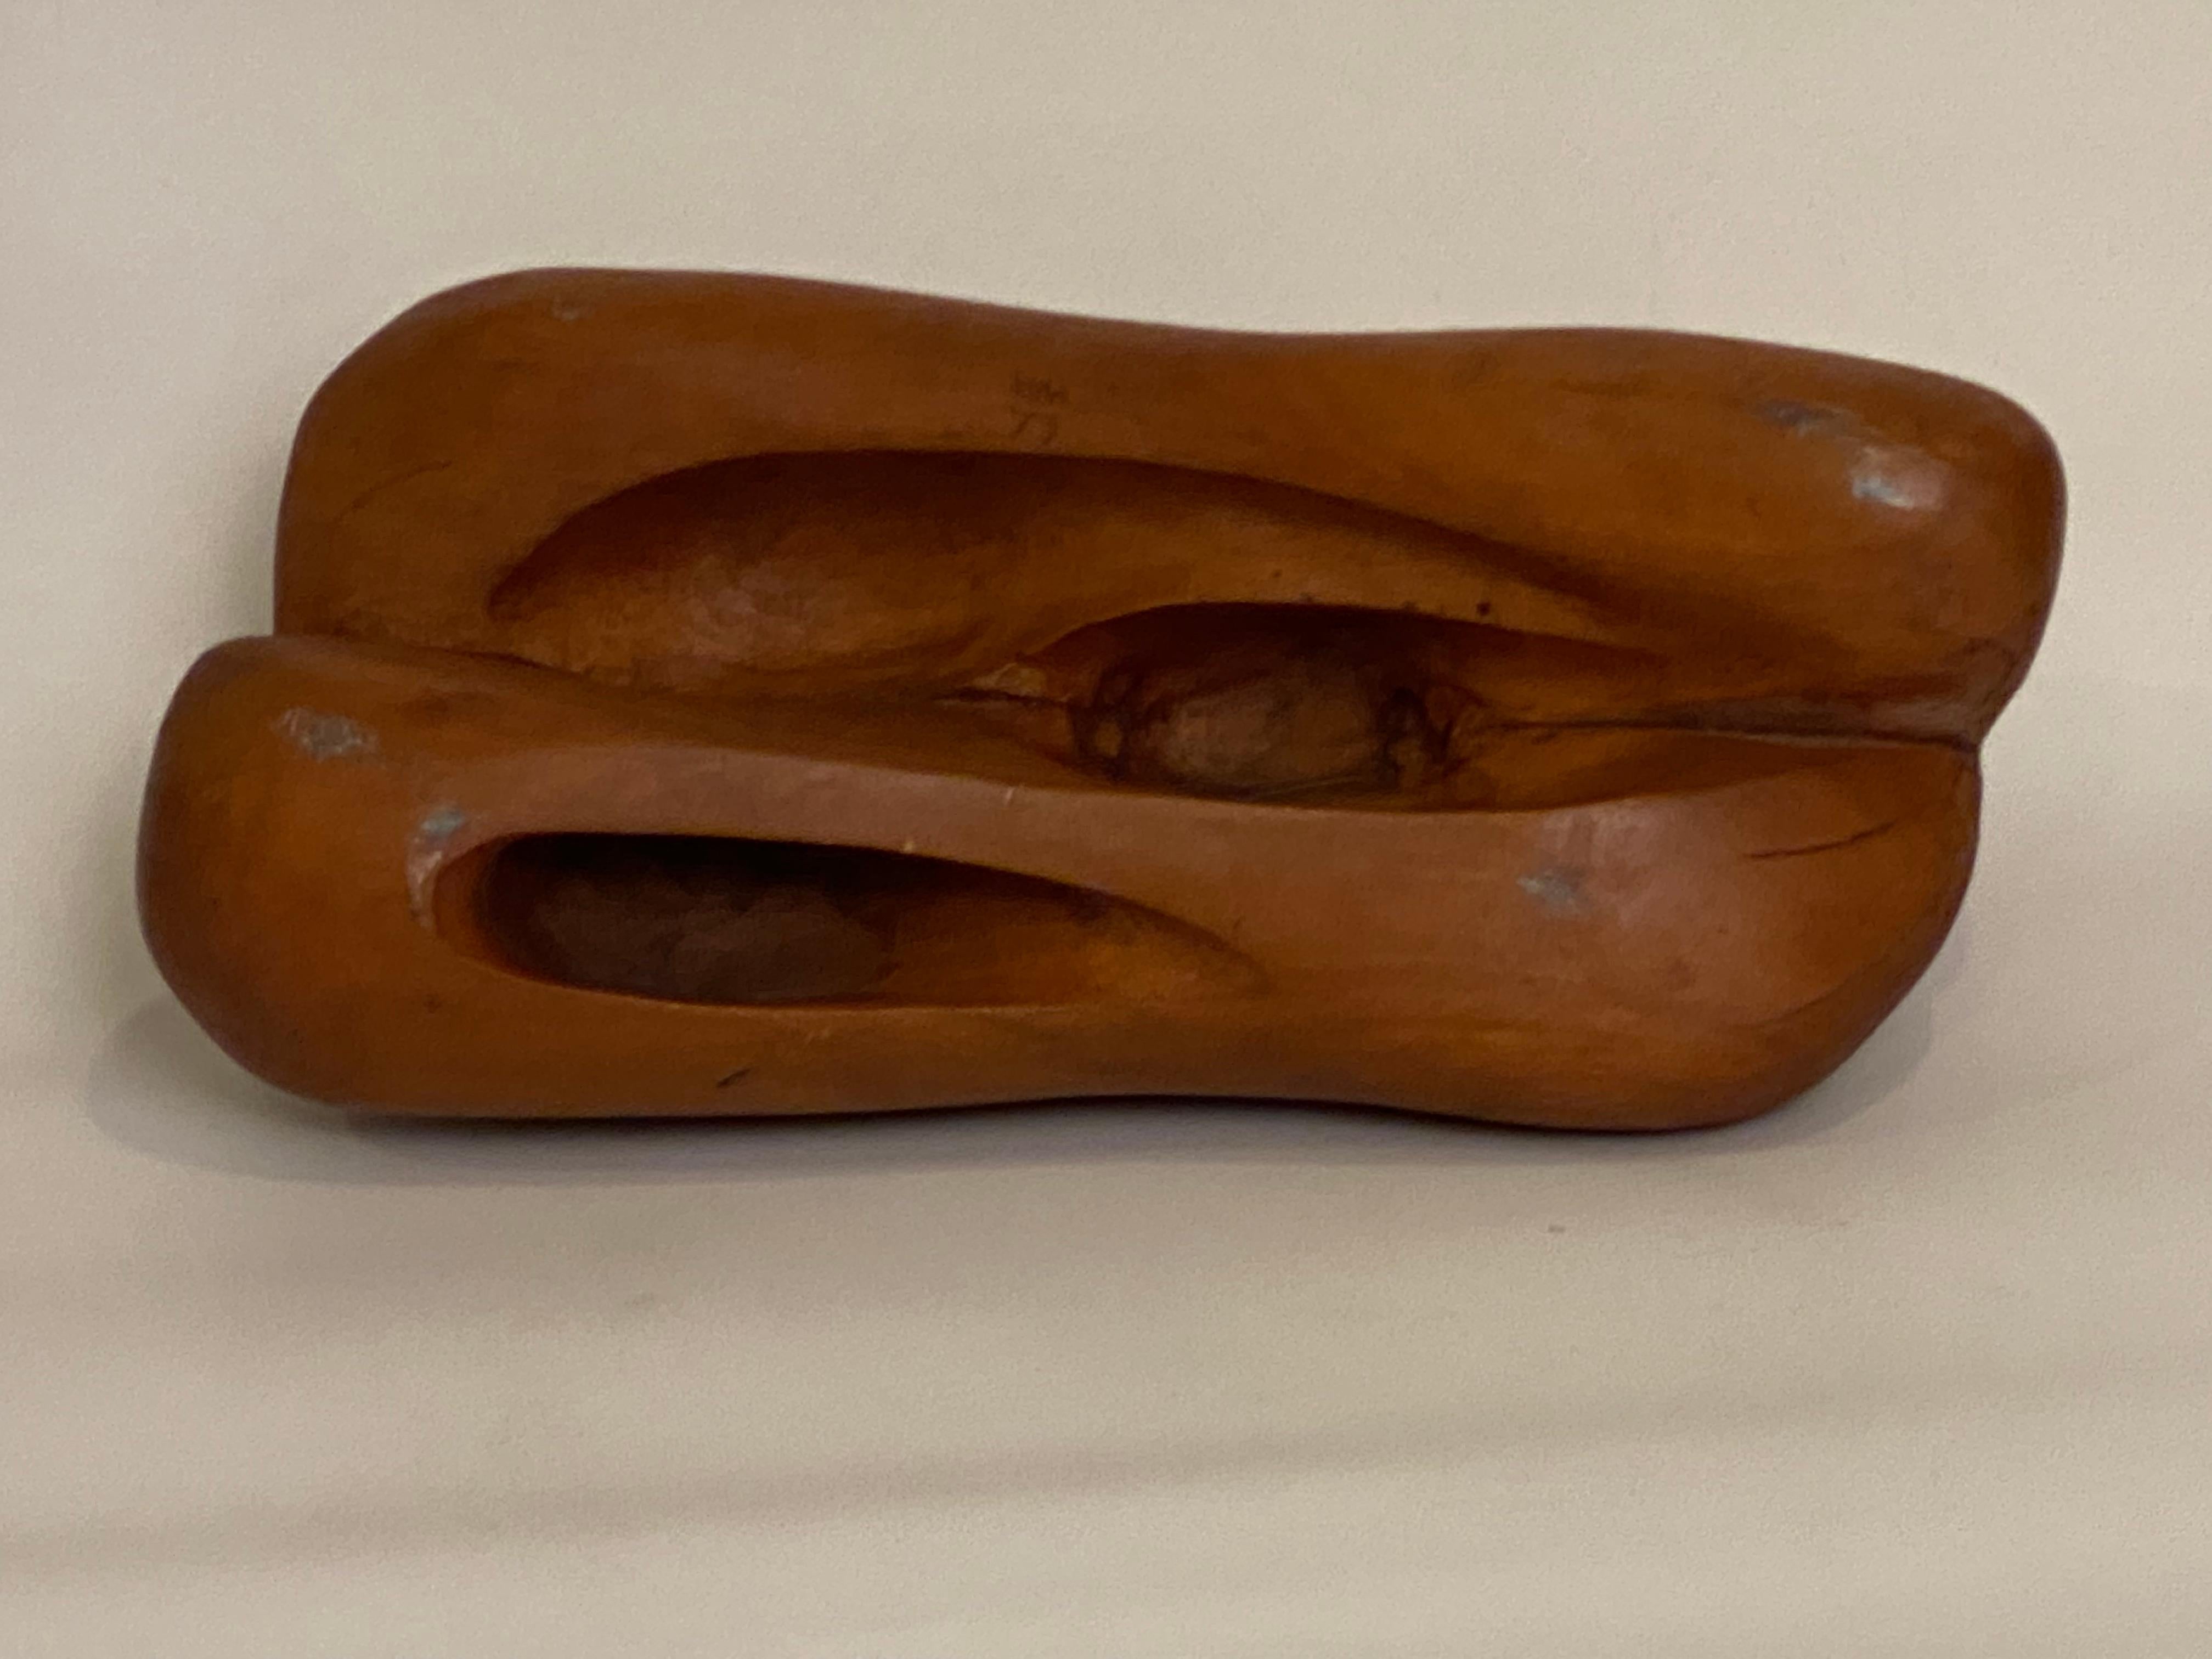 Carved wood free form sculpture, circa 1973. Excellent hand carved solid Maple or Birch Organic Modern abstract sculpture. The artist has rendered open spaces and pierced areas to create intriguing affects of shadowing, contrasts of light and dark,